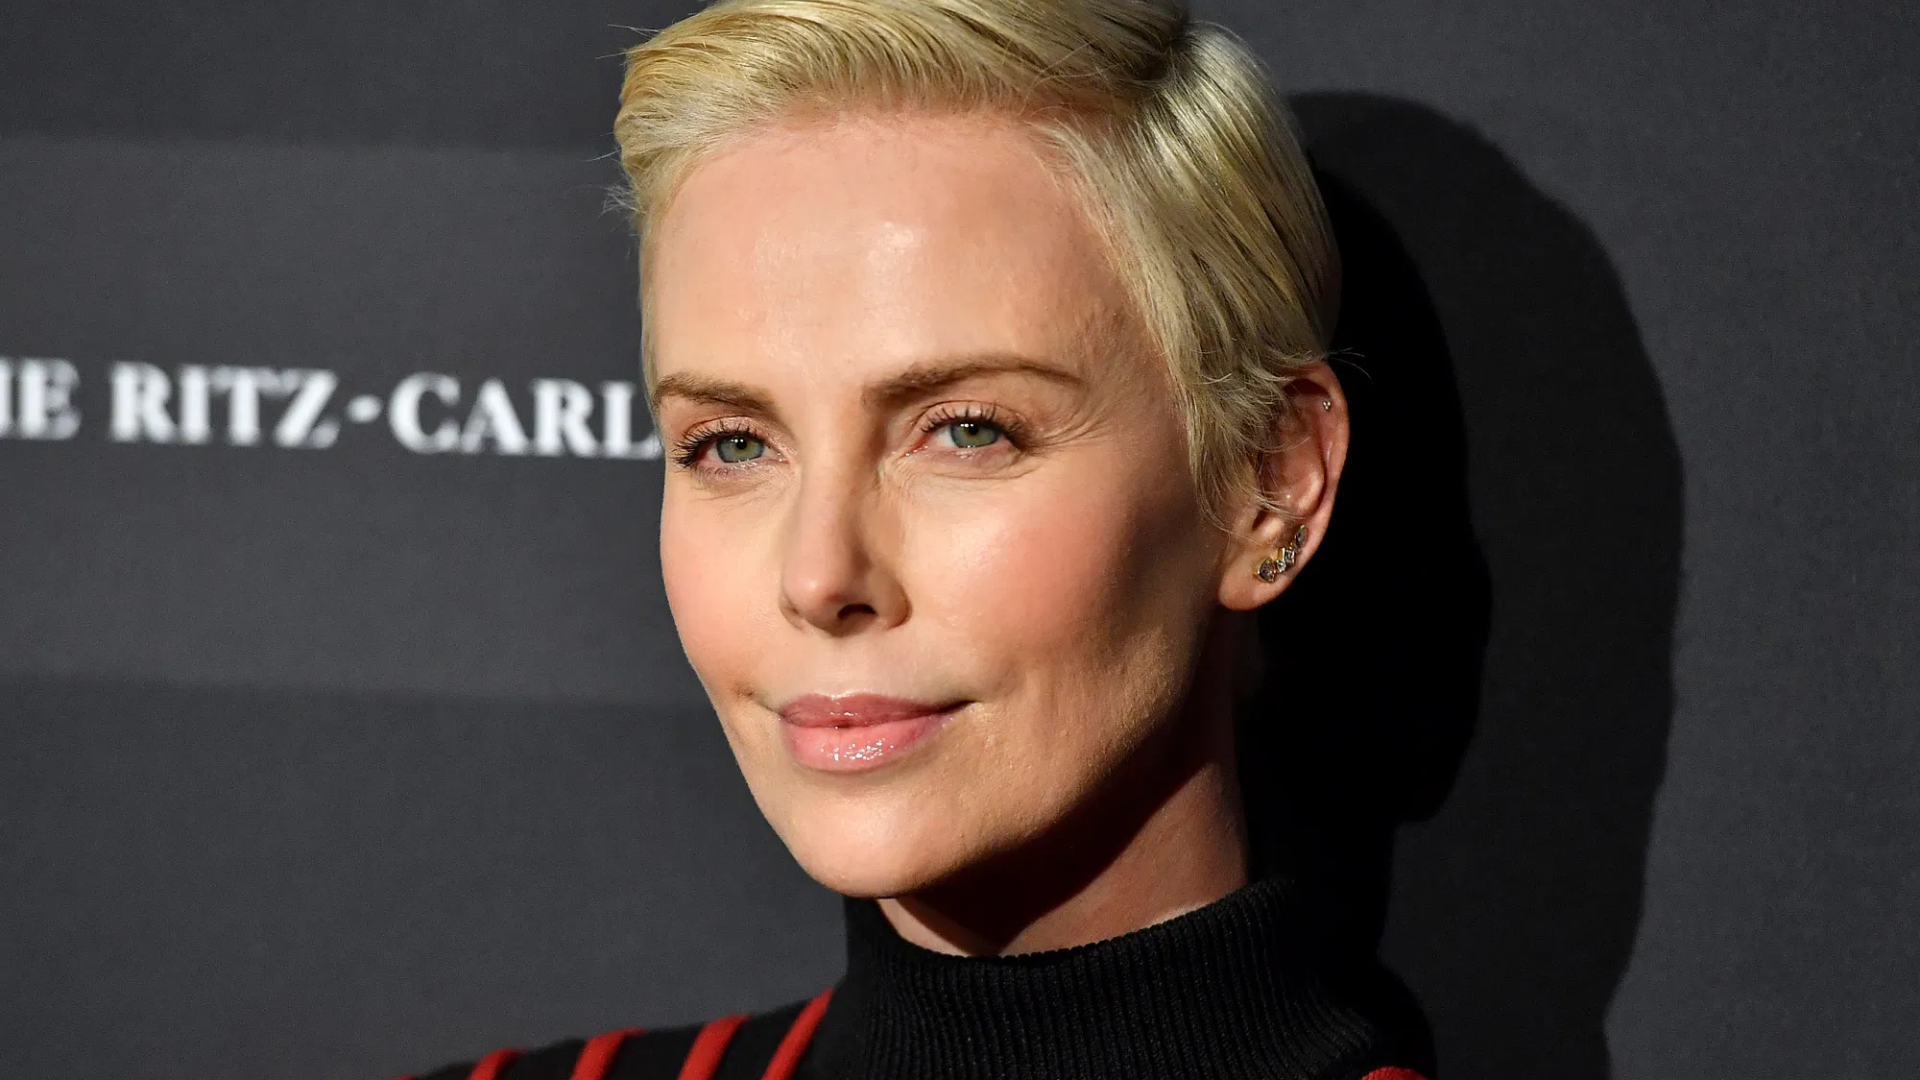 Charlize Theron on the red carpet, with a short blonde hair - wearing stripy black and red turtleneck jumper and stud earrings.